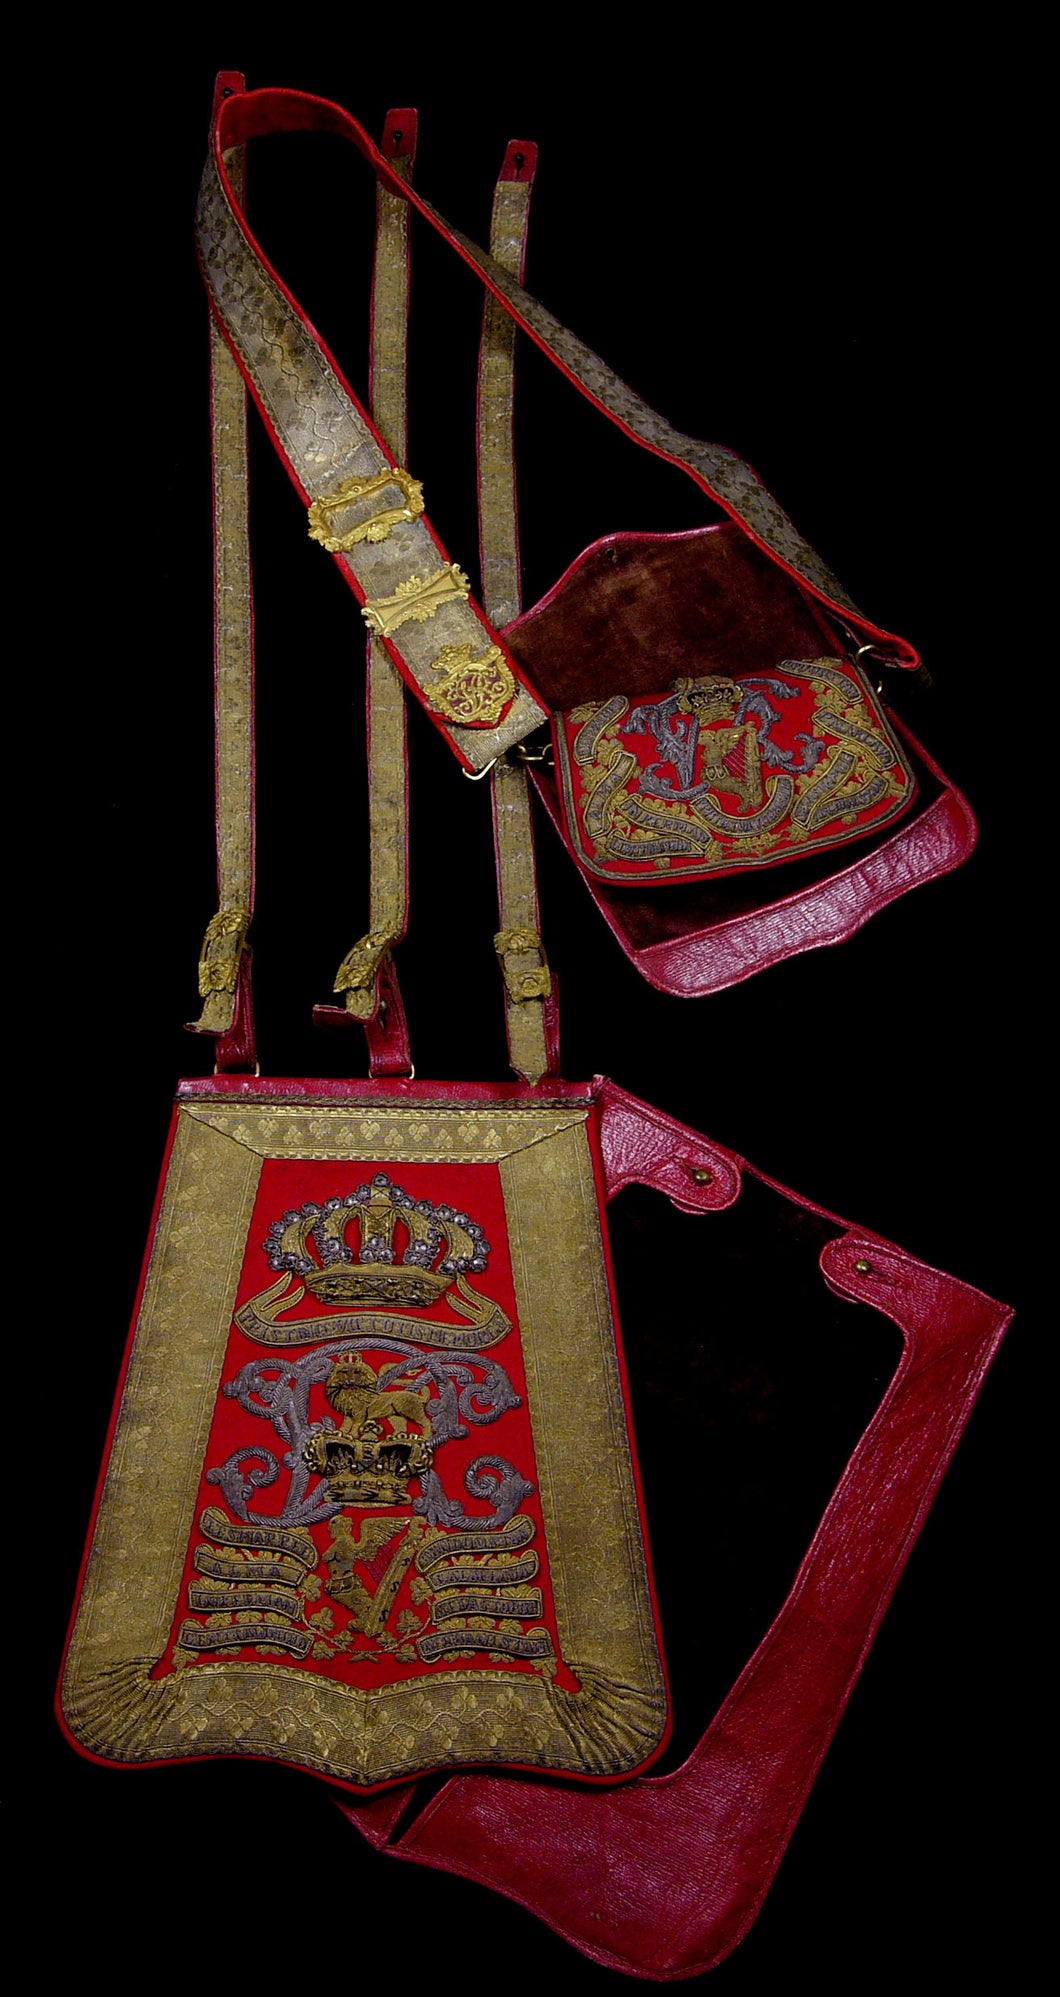 8th (King’s Royal Irish) Hussars Officer’s Full Dress Sabretache, Shoulder Belt and Pouch, Circa 1890